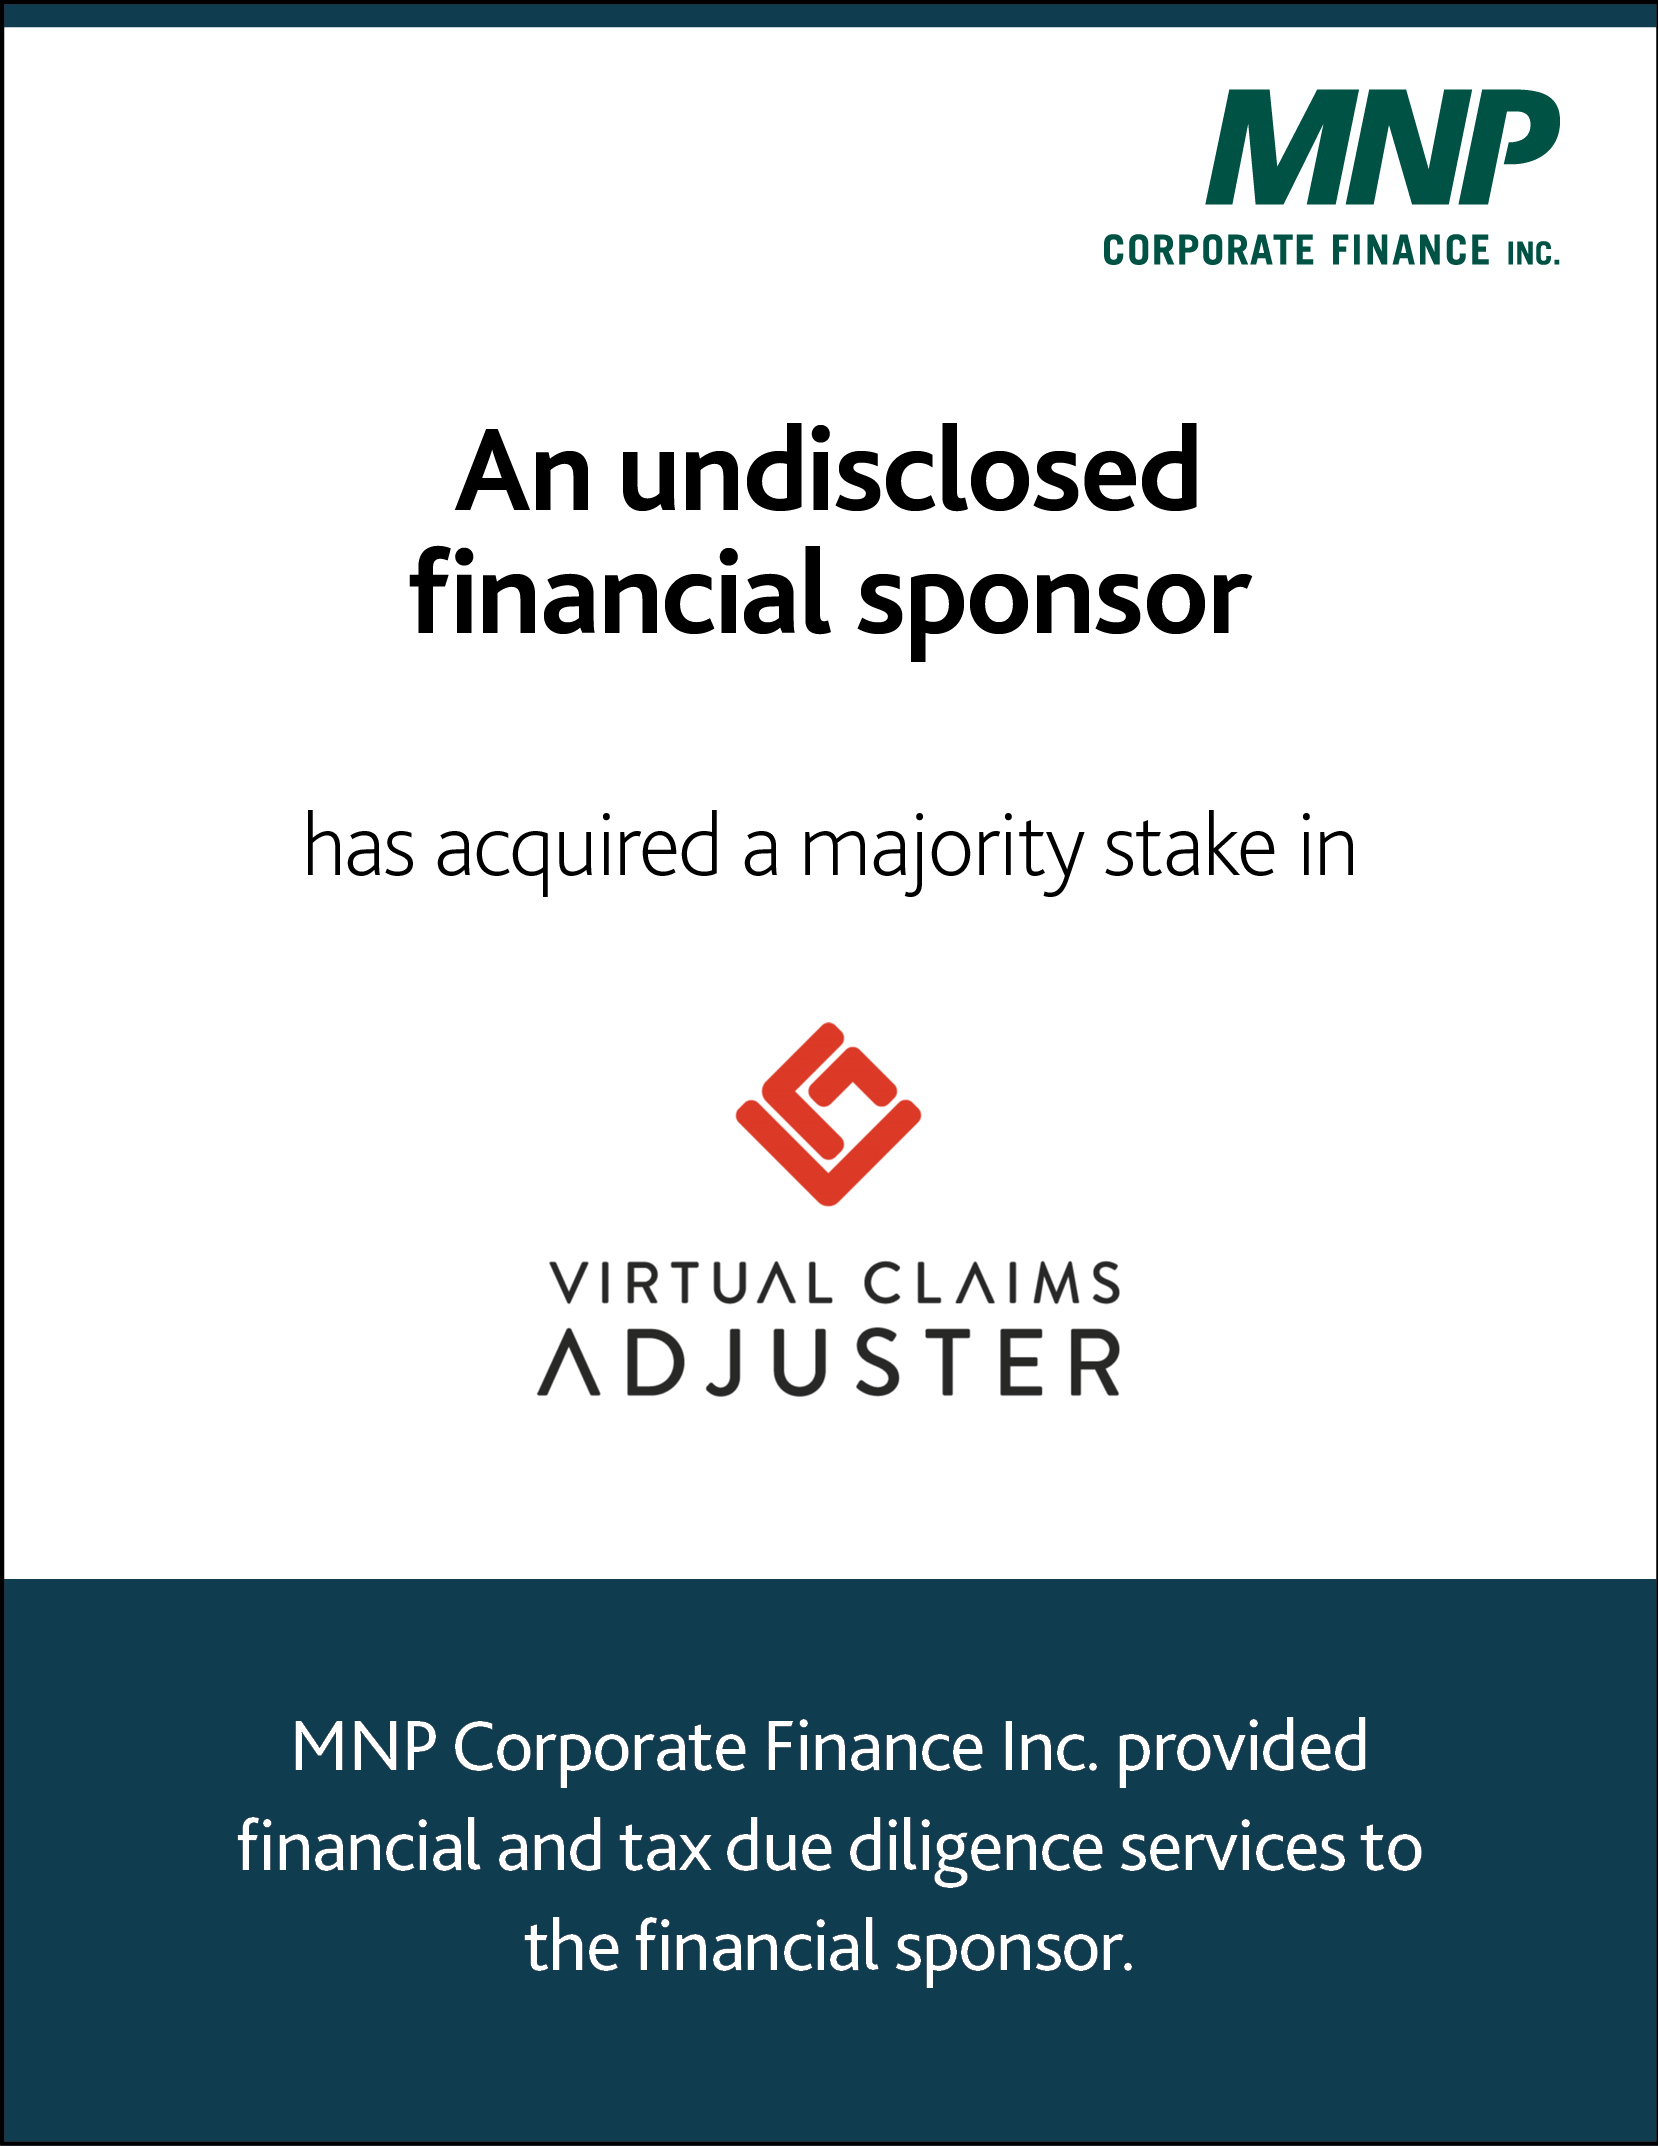 An undisclosed financial sponsor has acquired a majority stake in virtual claims adjuster